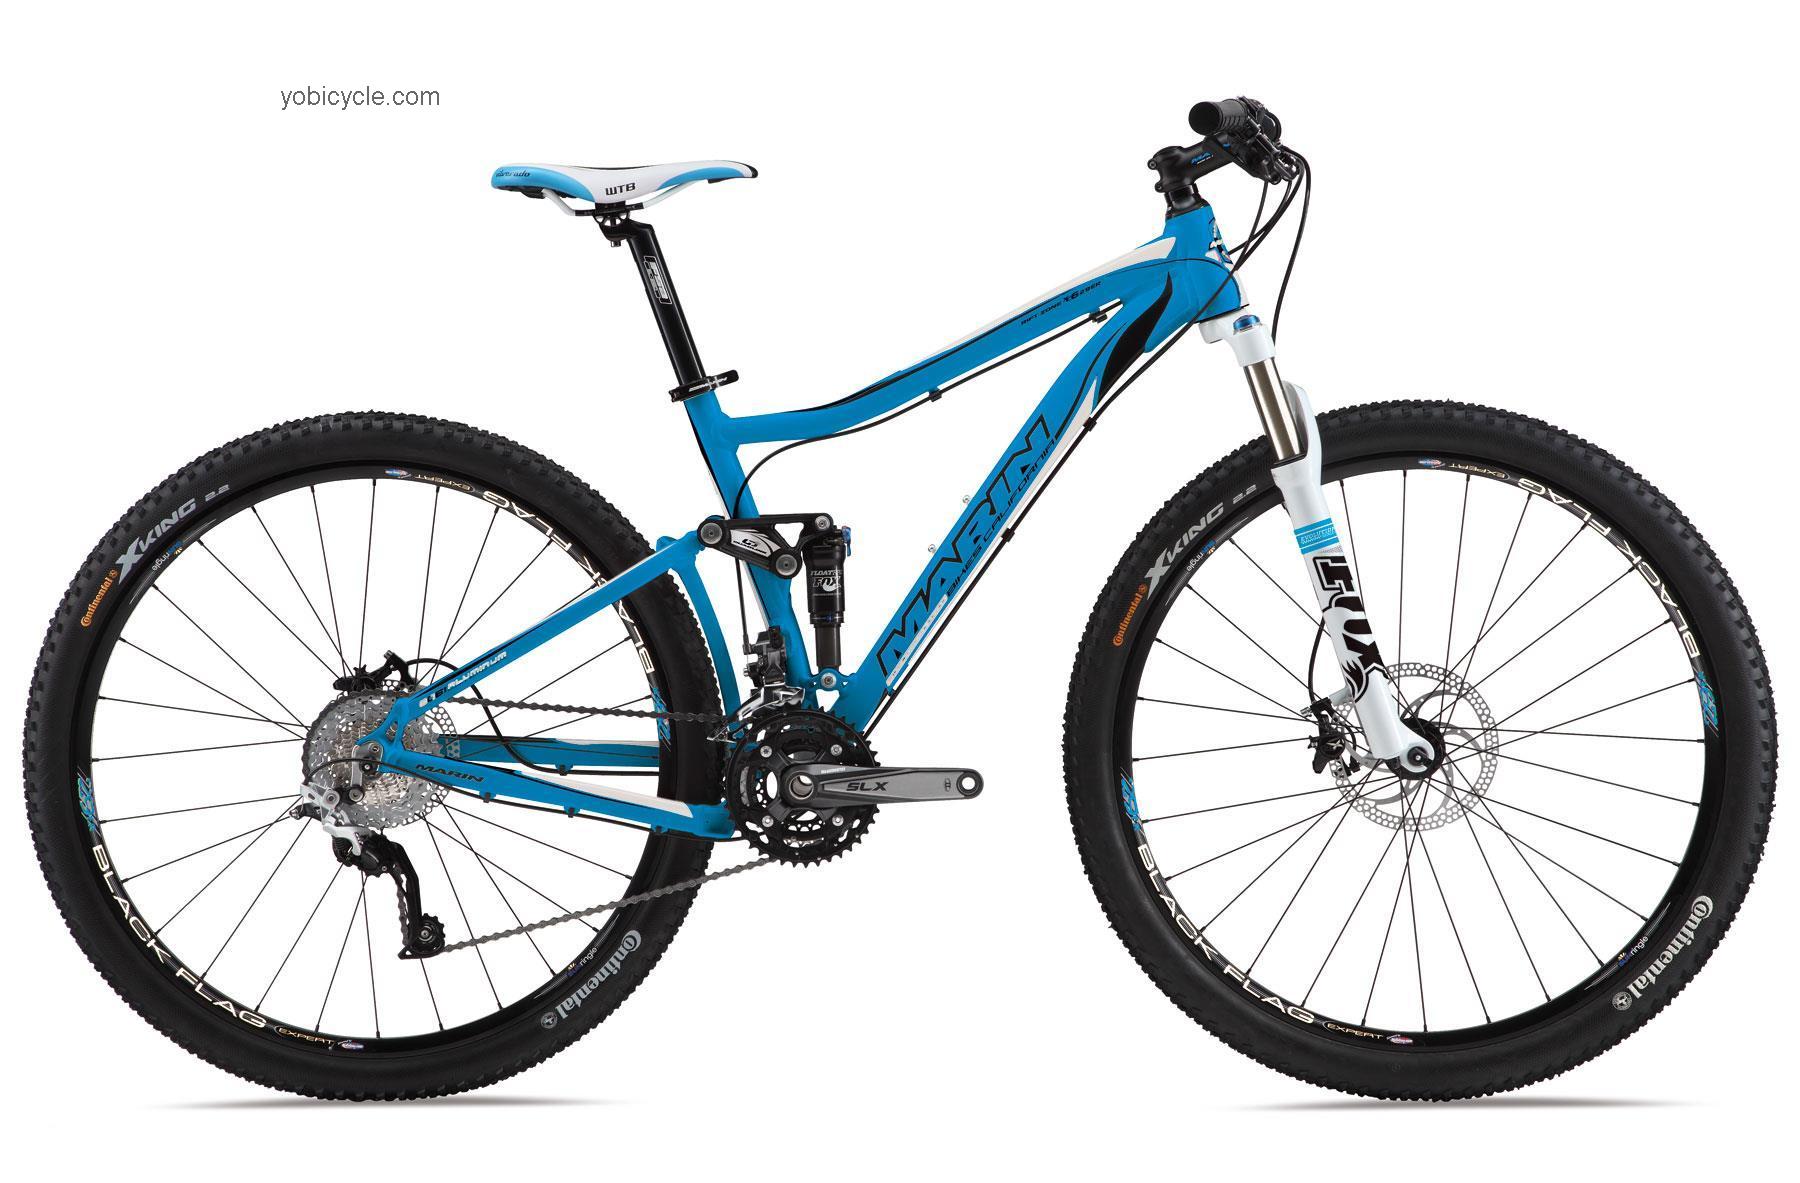 Marin Rift Zone 29er XC7 2012 comparison online with competitors